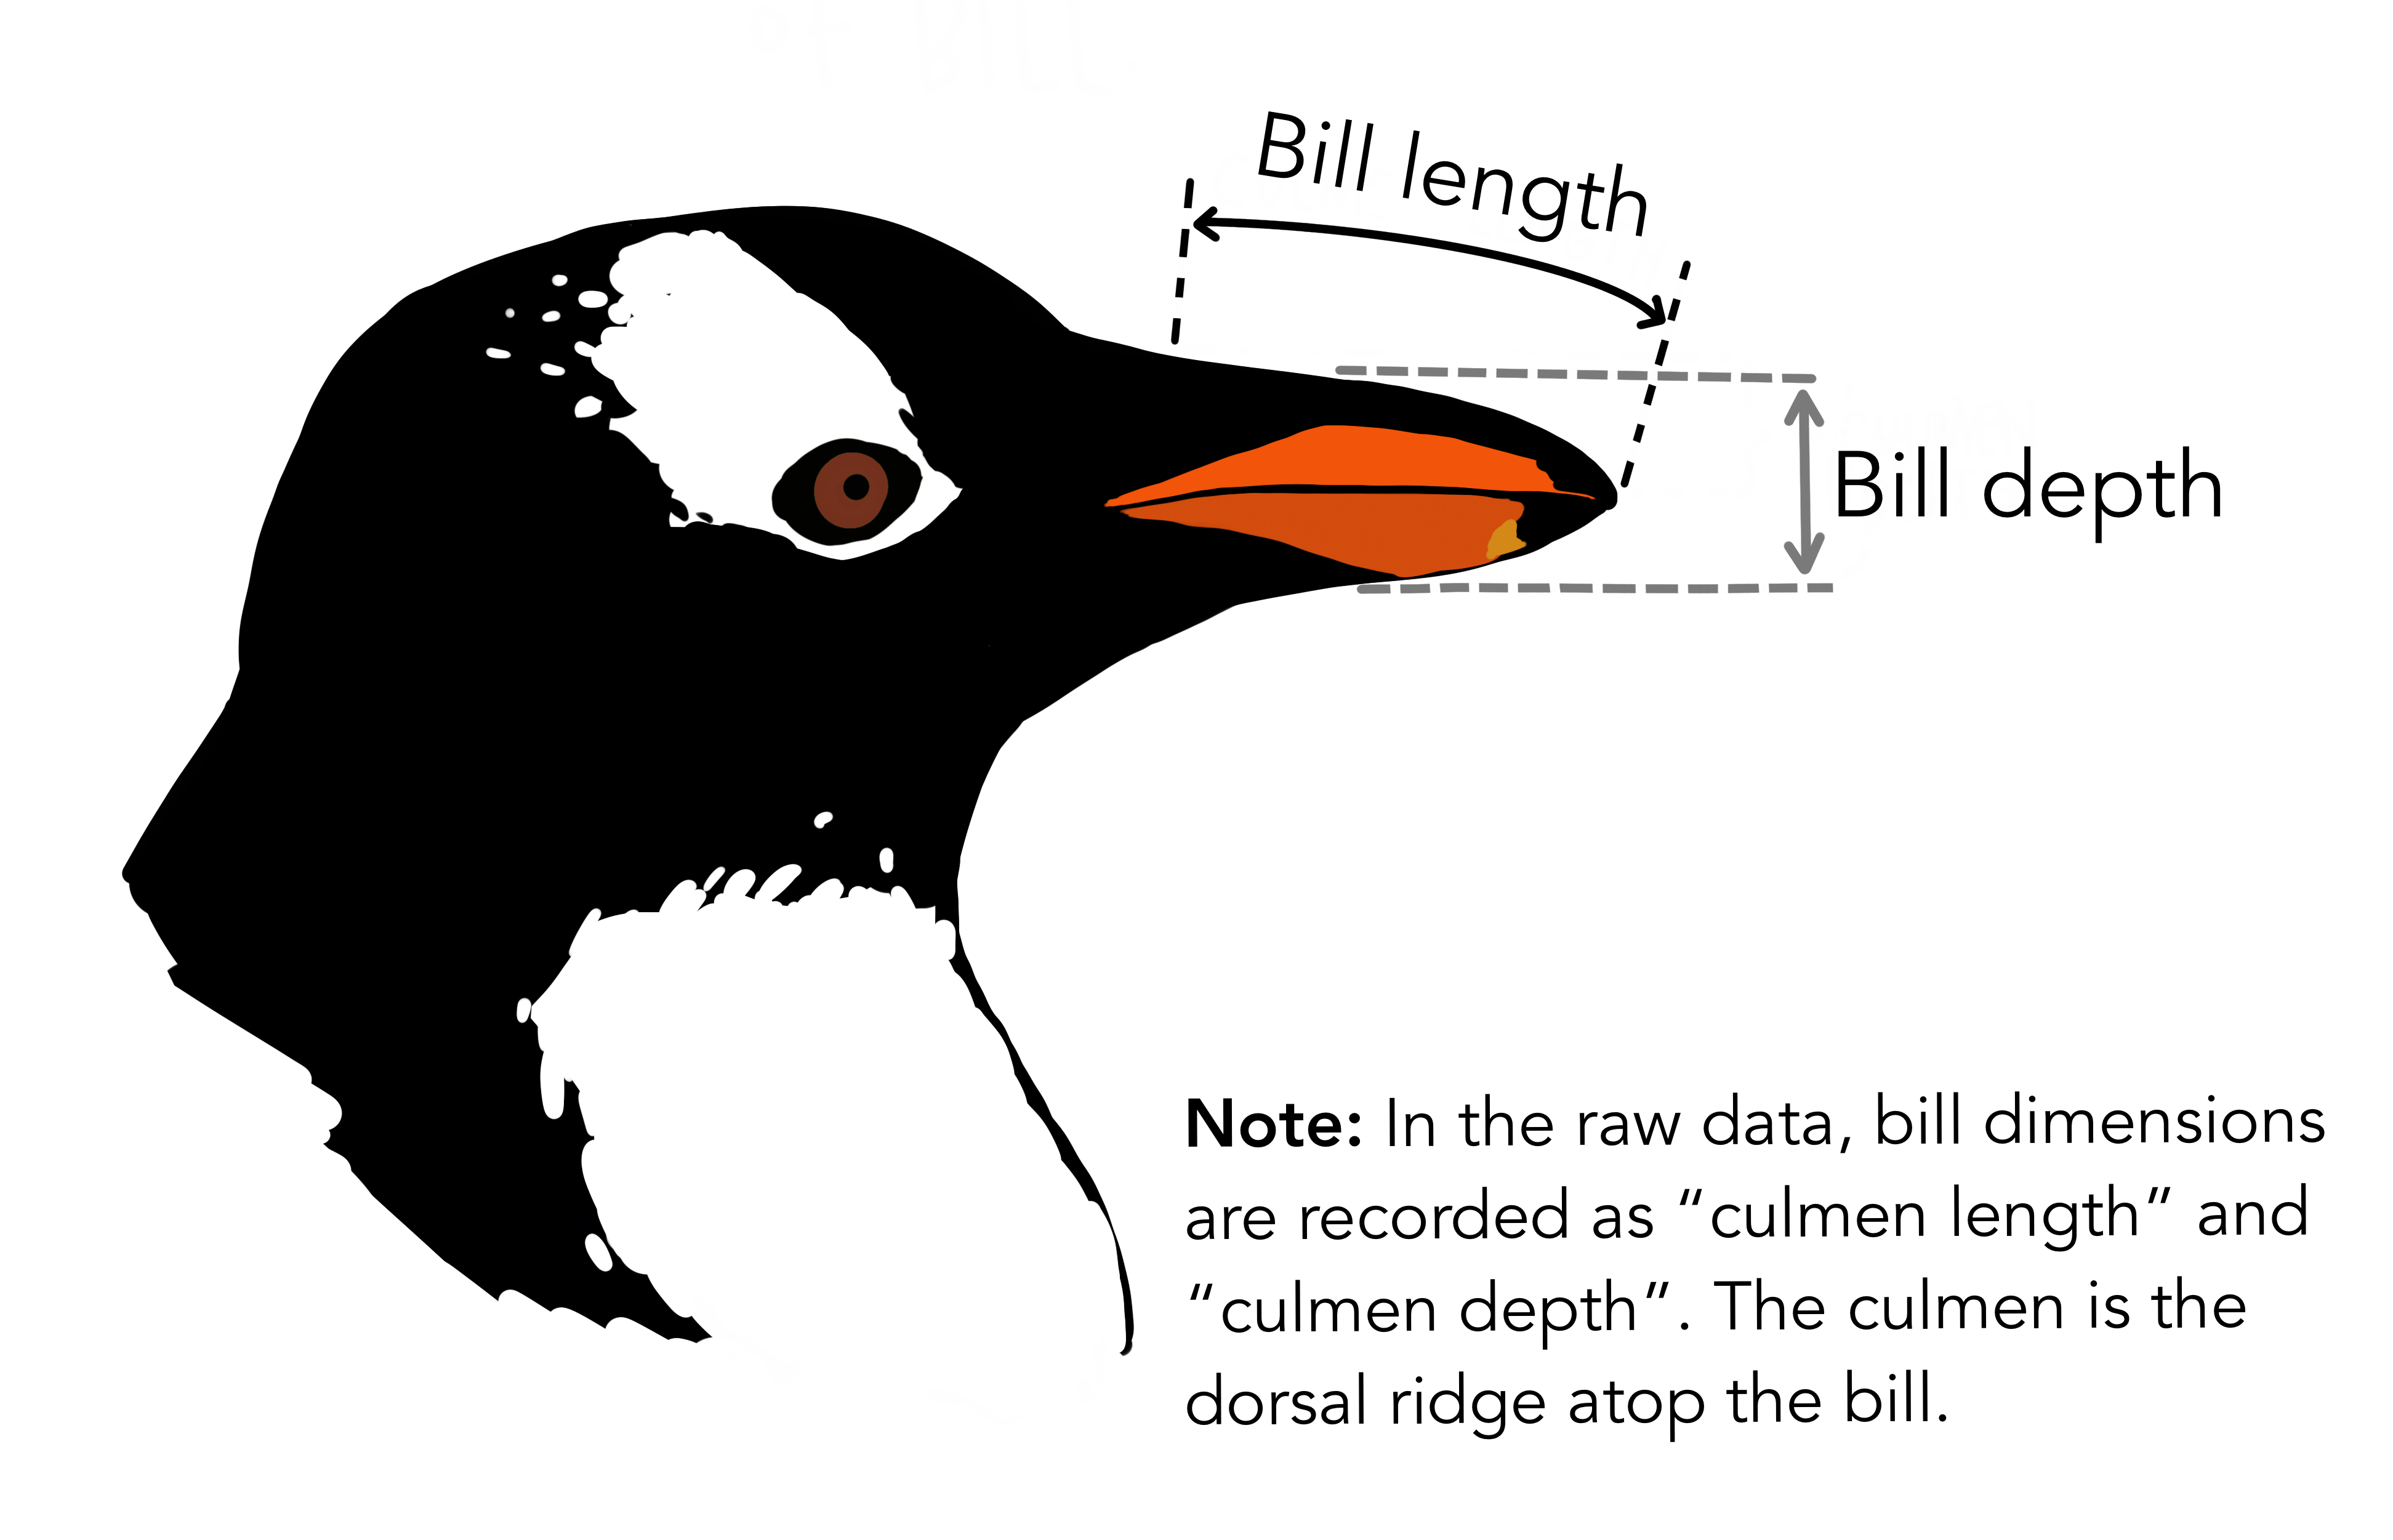 depiction of bill length protruding from the penguins face, and bill depth, the height of the bill